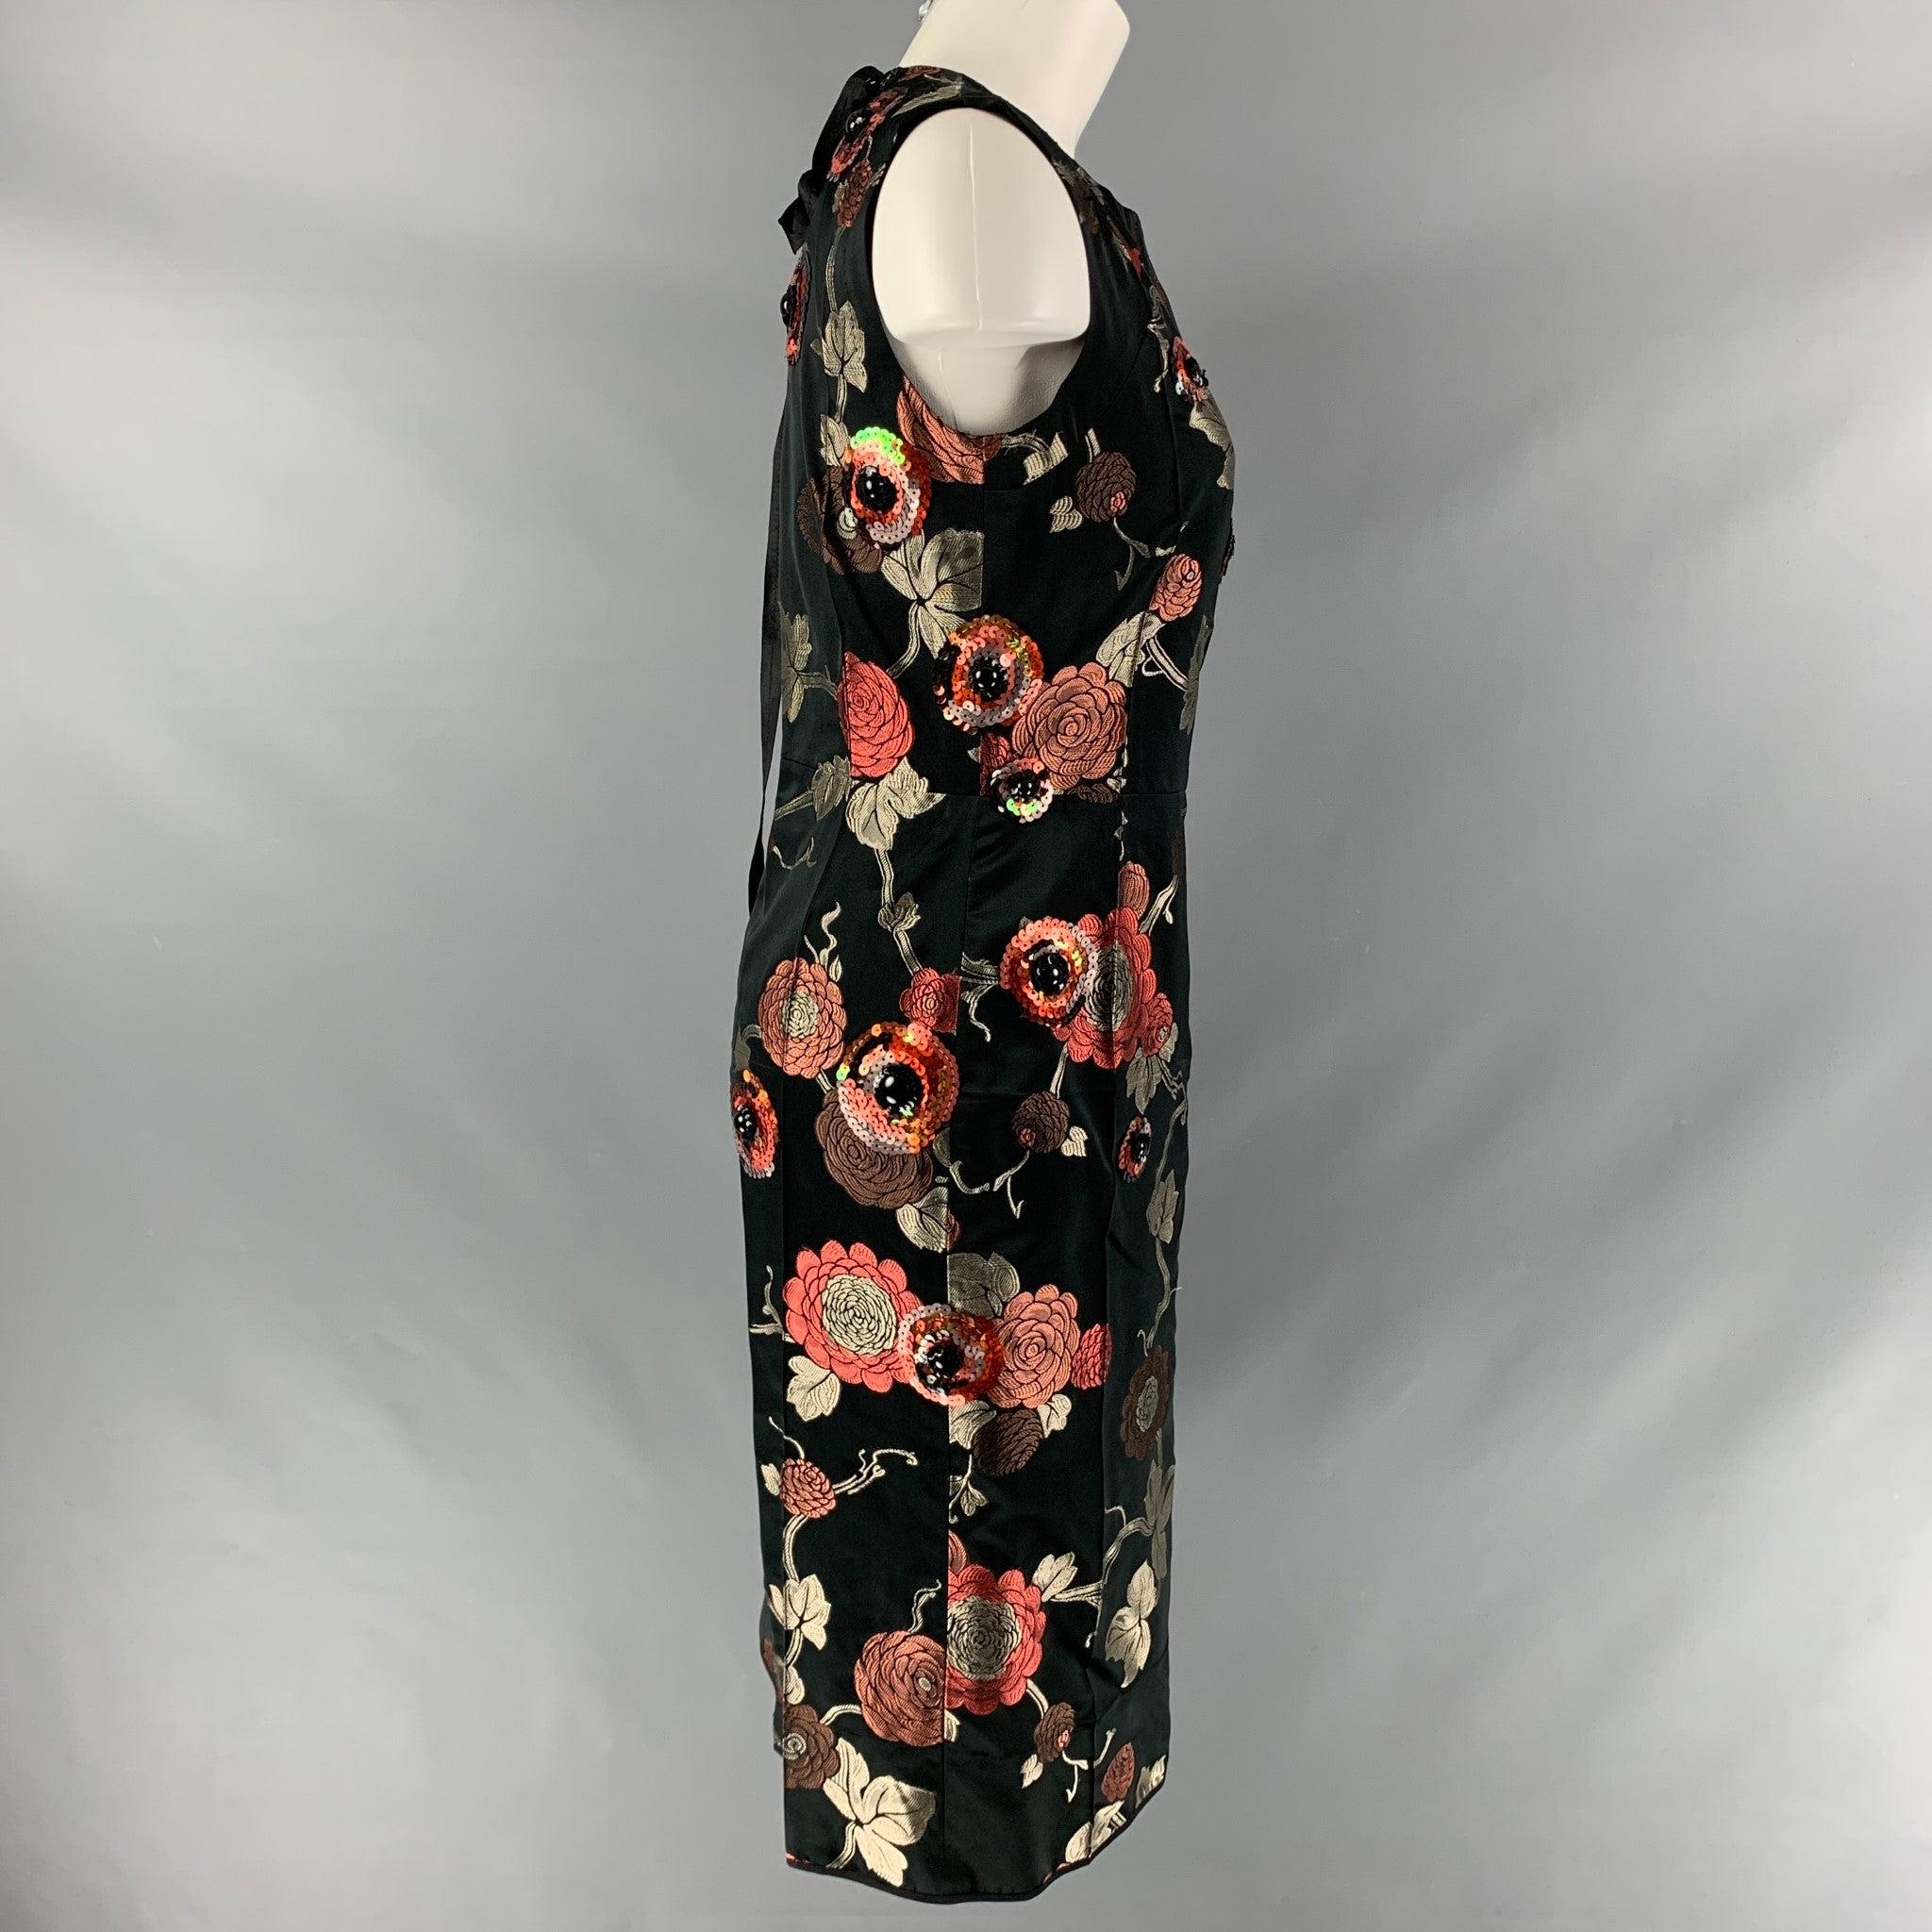 MARC JACOBS sheath dress comes in a black floral jacquard featuring sequins applique, sleeveless, and a back zip up closure. Very Good Pre-Owned Condition. Fabric Tags Removed. 

Marked:   6 

Measurements: 
 
Shoulder: 14 inches Bust: 34 inches